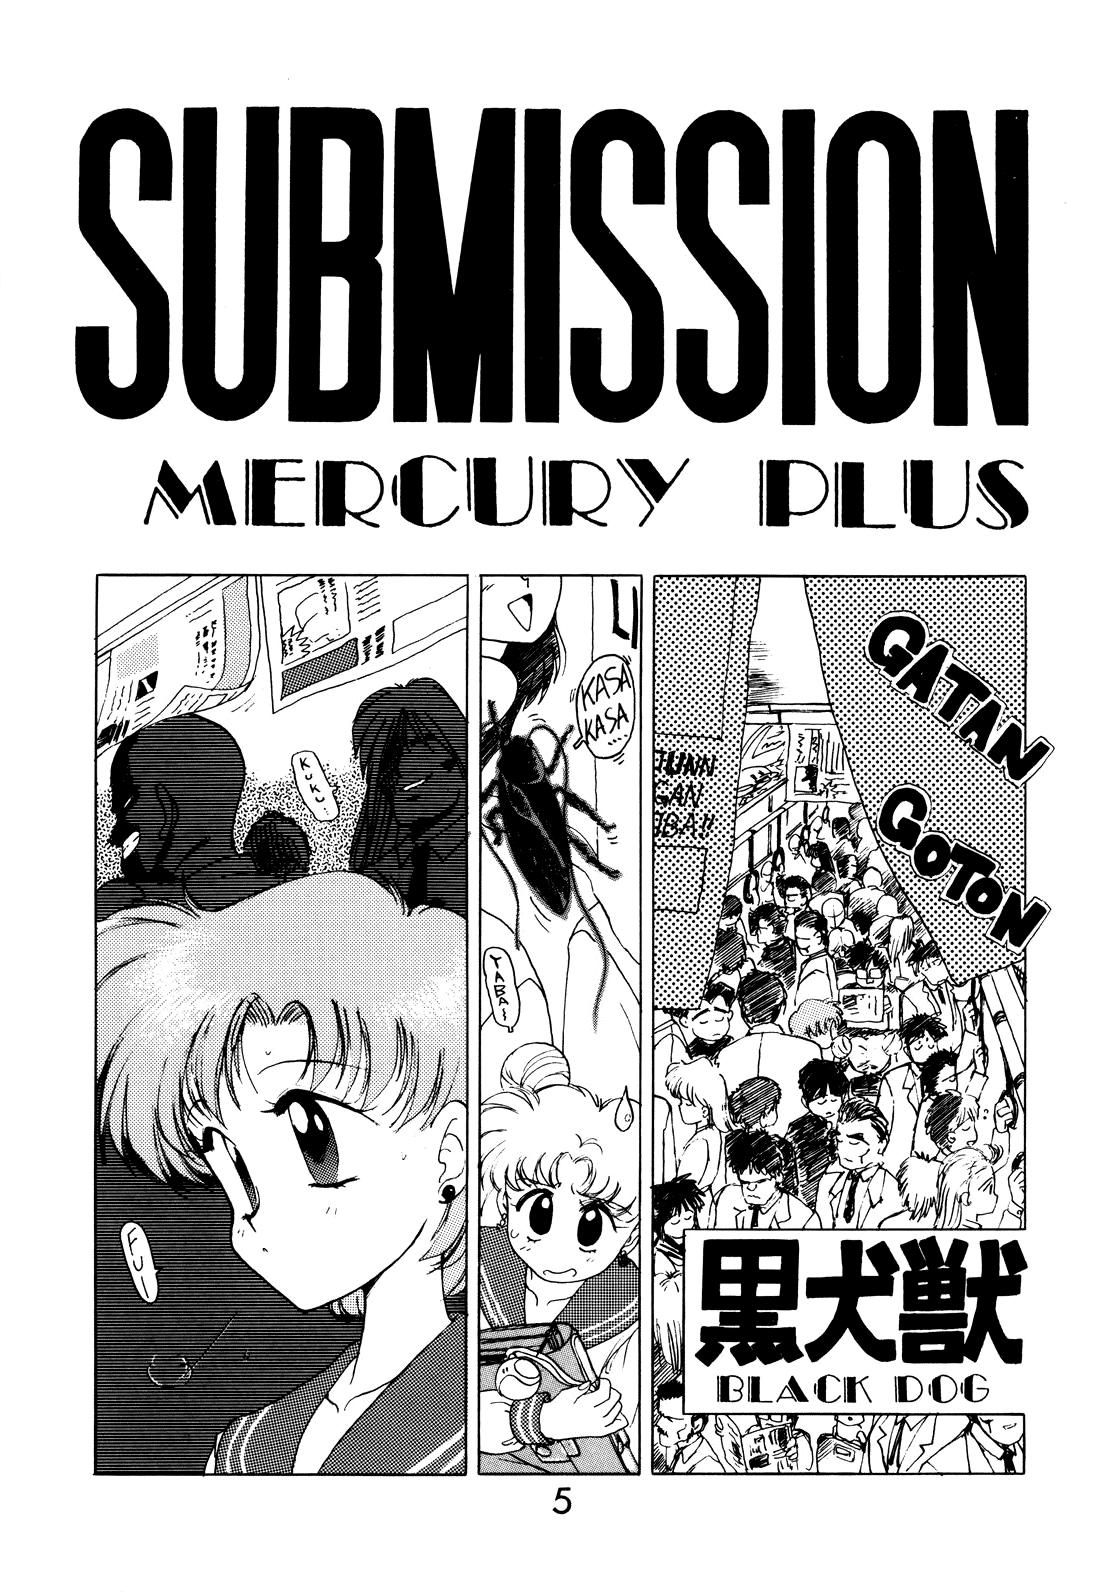 Cousin Submission Mercury Plus - Sailor moon Perfect Butt - Page 4